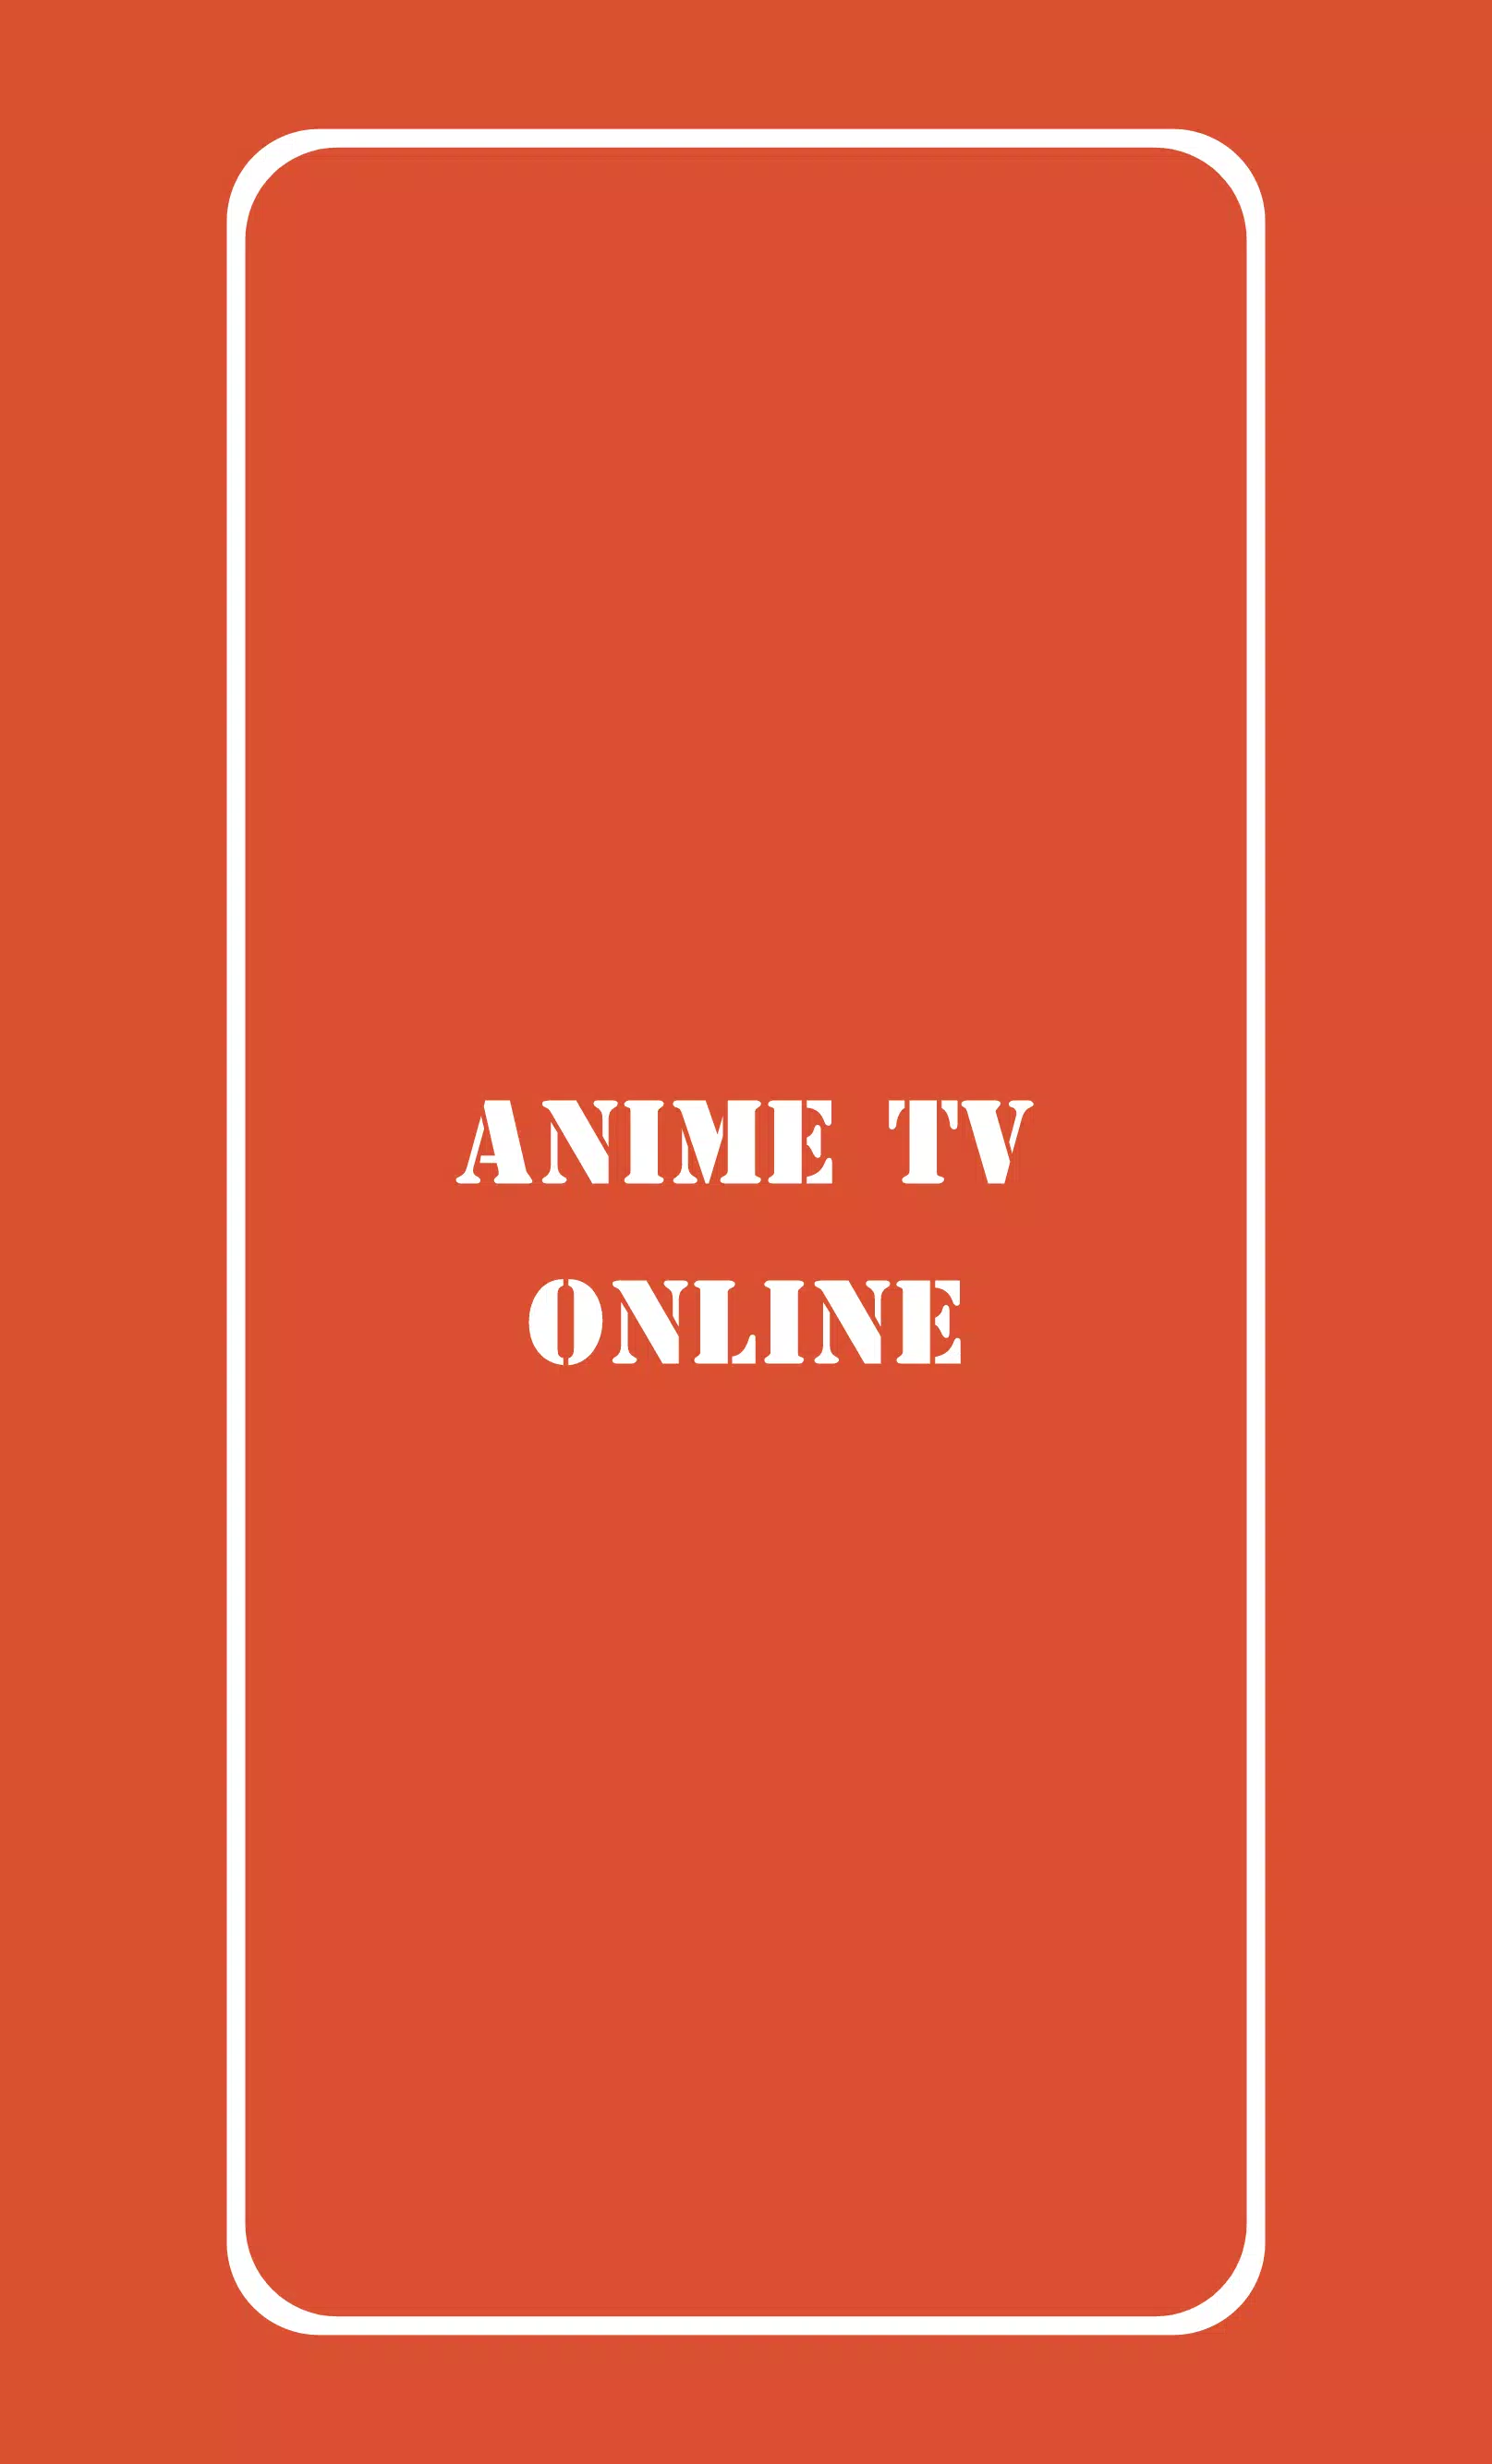 AnimeHd - Watch Free Anime TV APK 1.0 for Android – Download AnimeHd -  Watch Free Anime TV APK Latest Version from